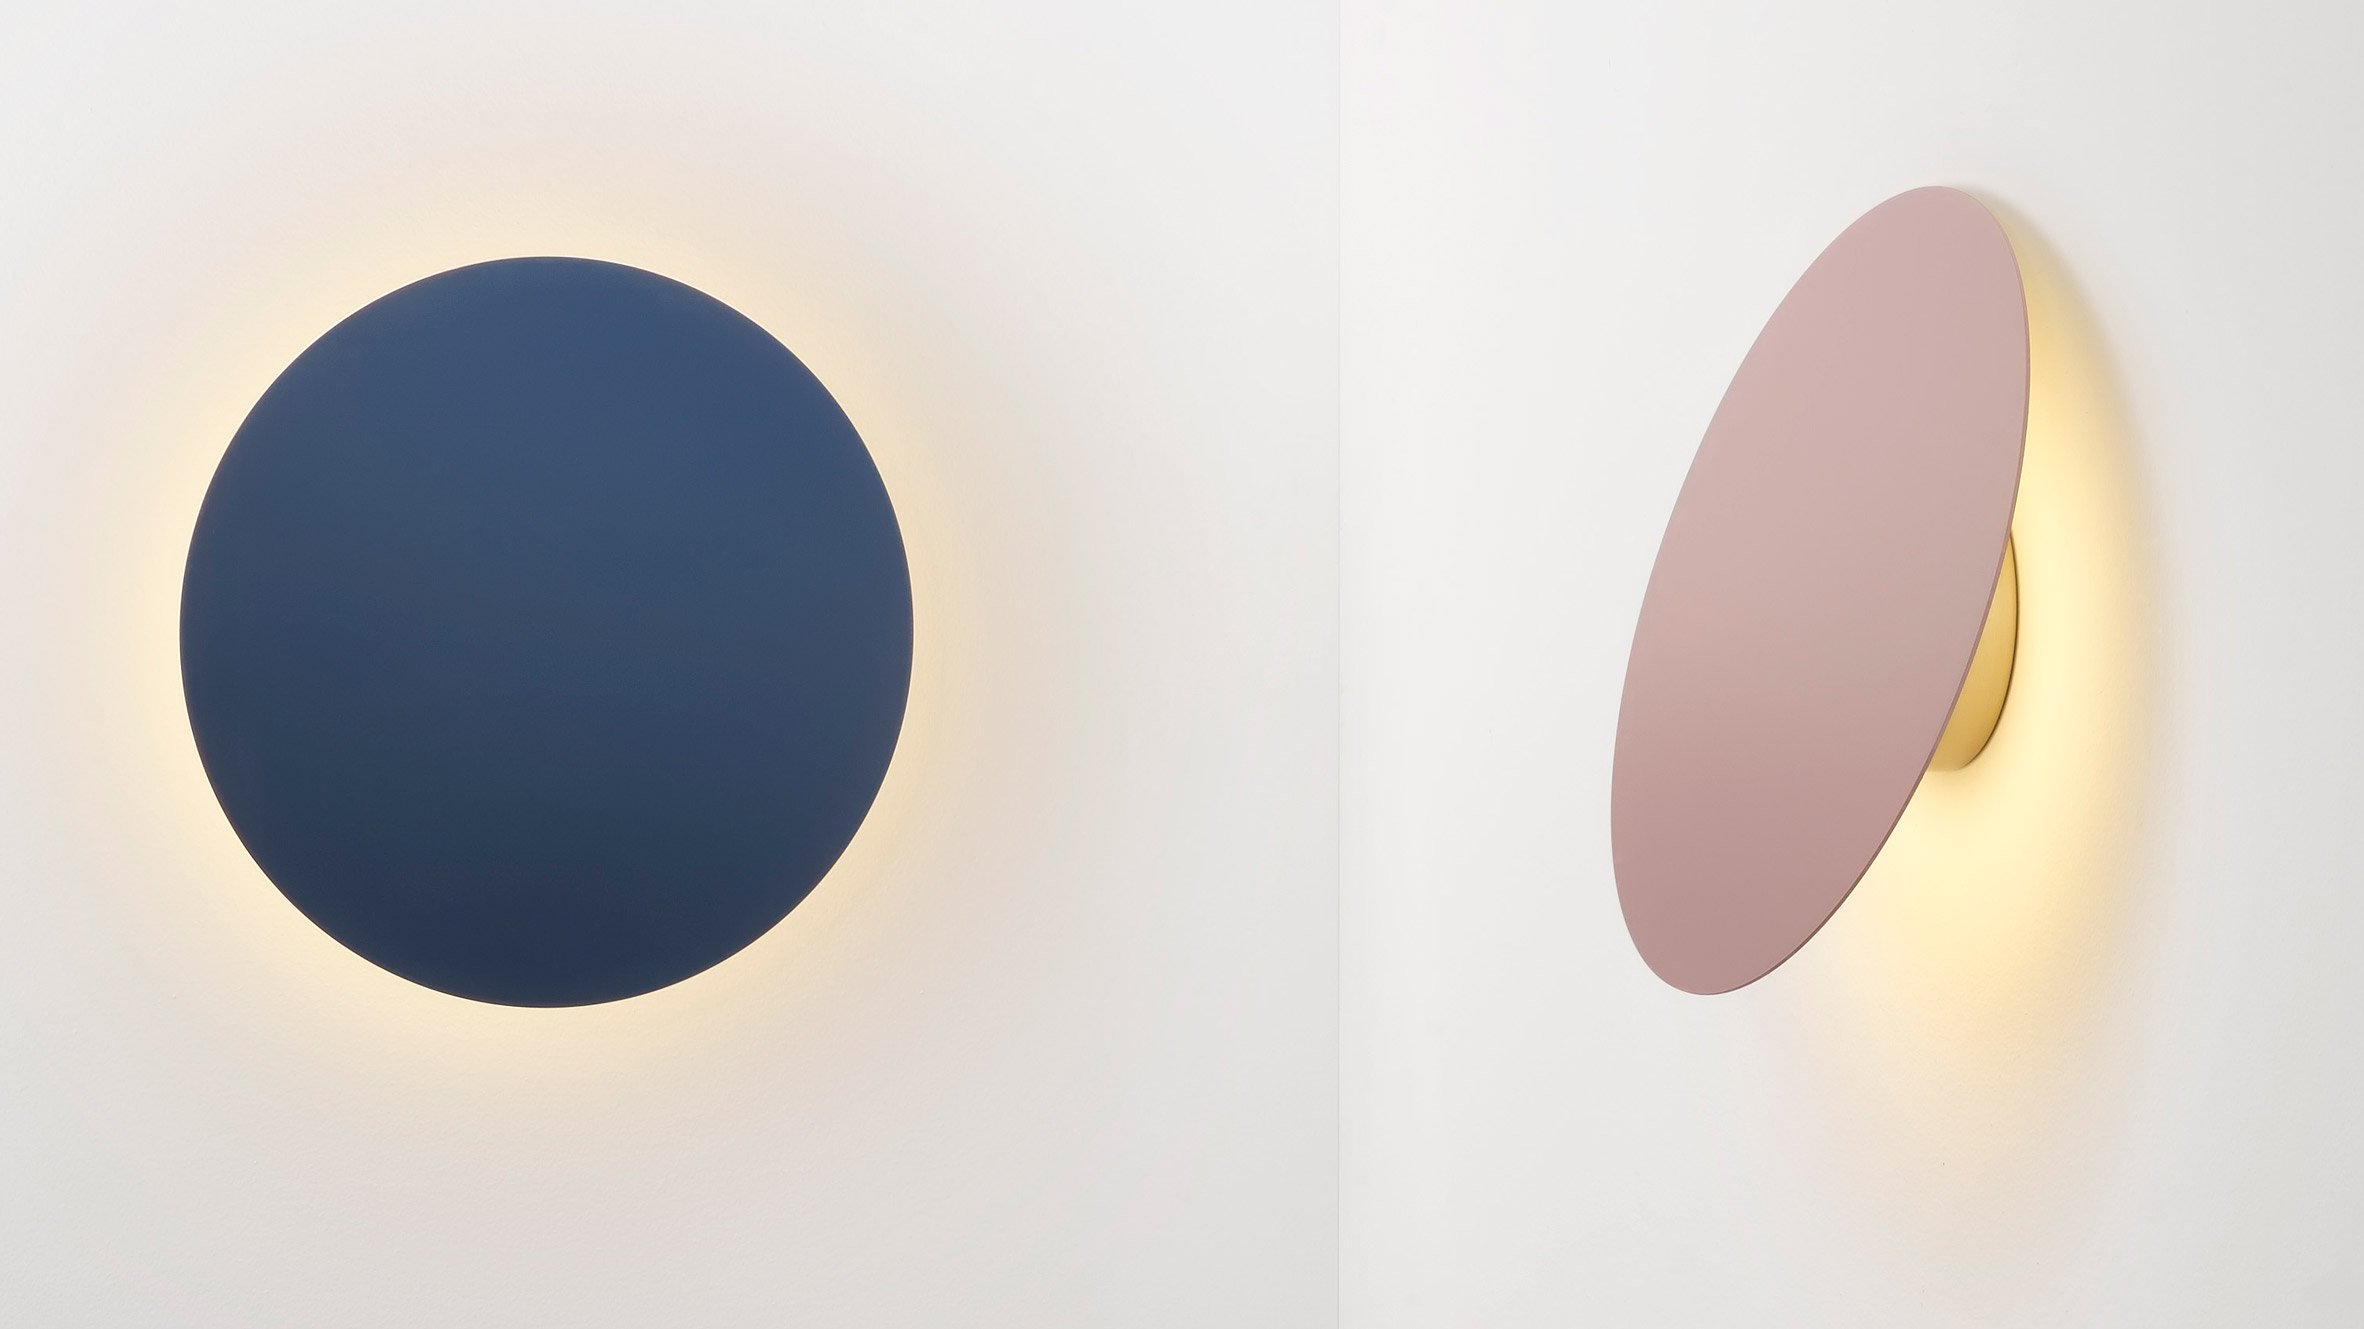 Polar Wall Lights in inspired by the phases of the moon and it pivots to imitate them